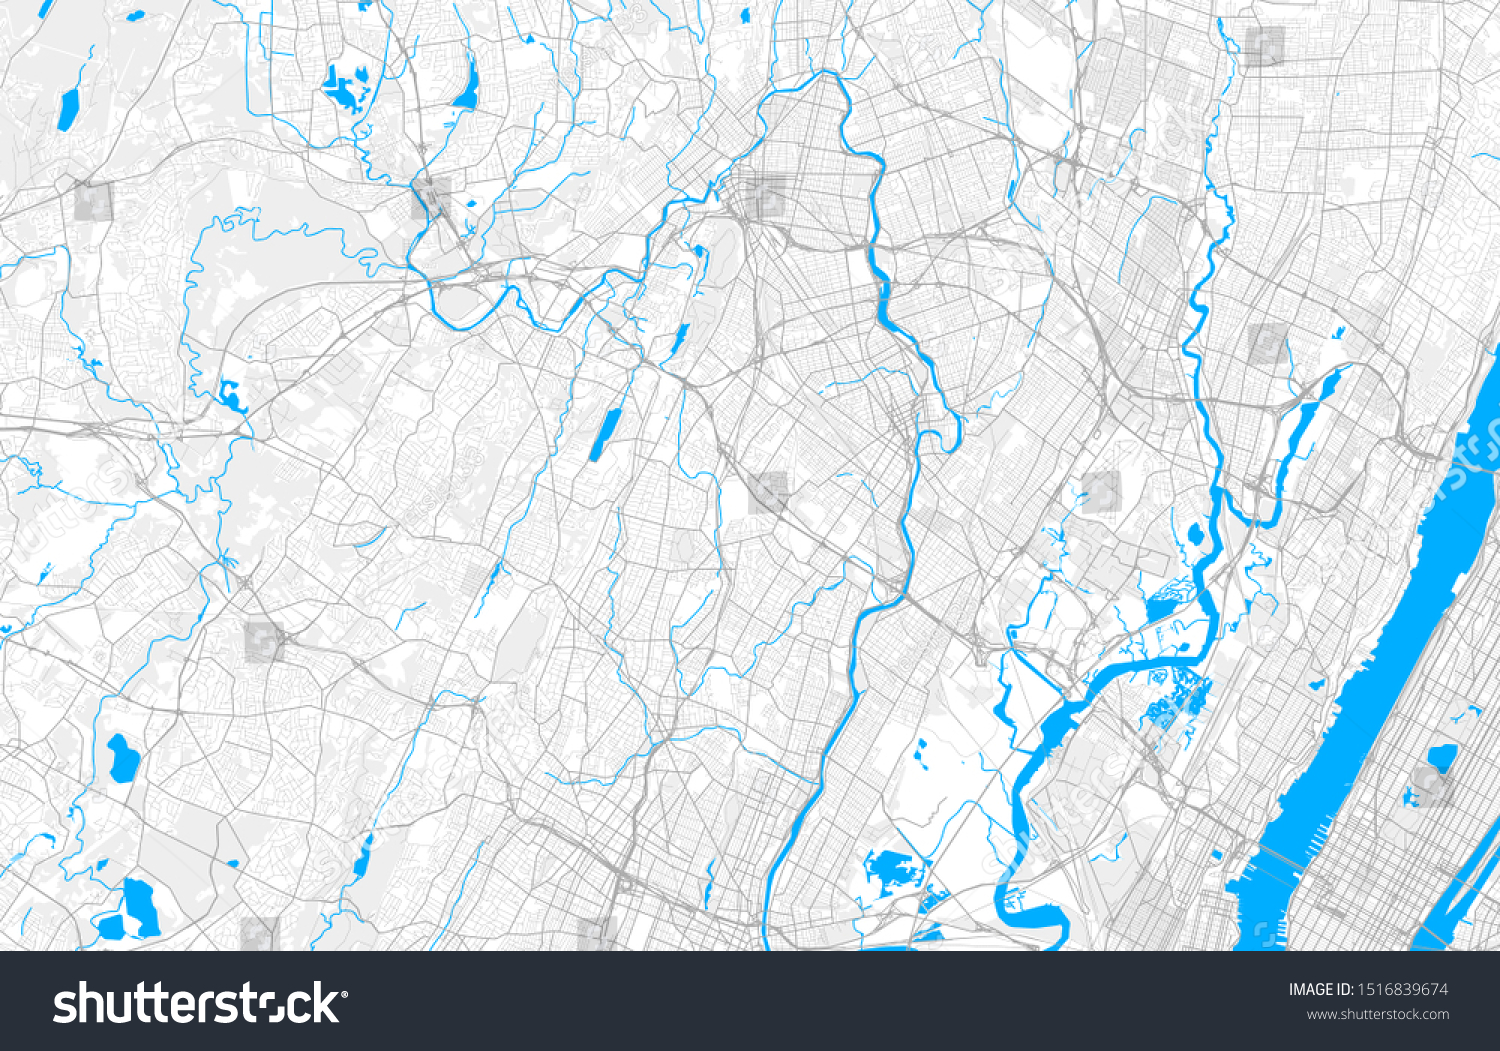 Rich Detailed Vector Area Map Of Clifton New Royalty Free Stock Vector 1516839674 1005